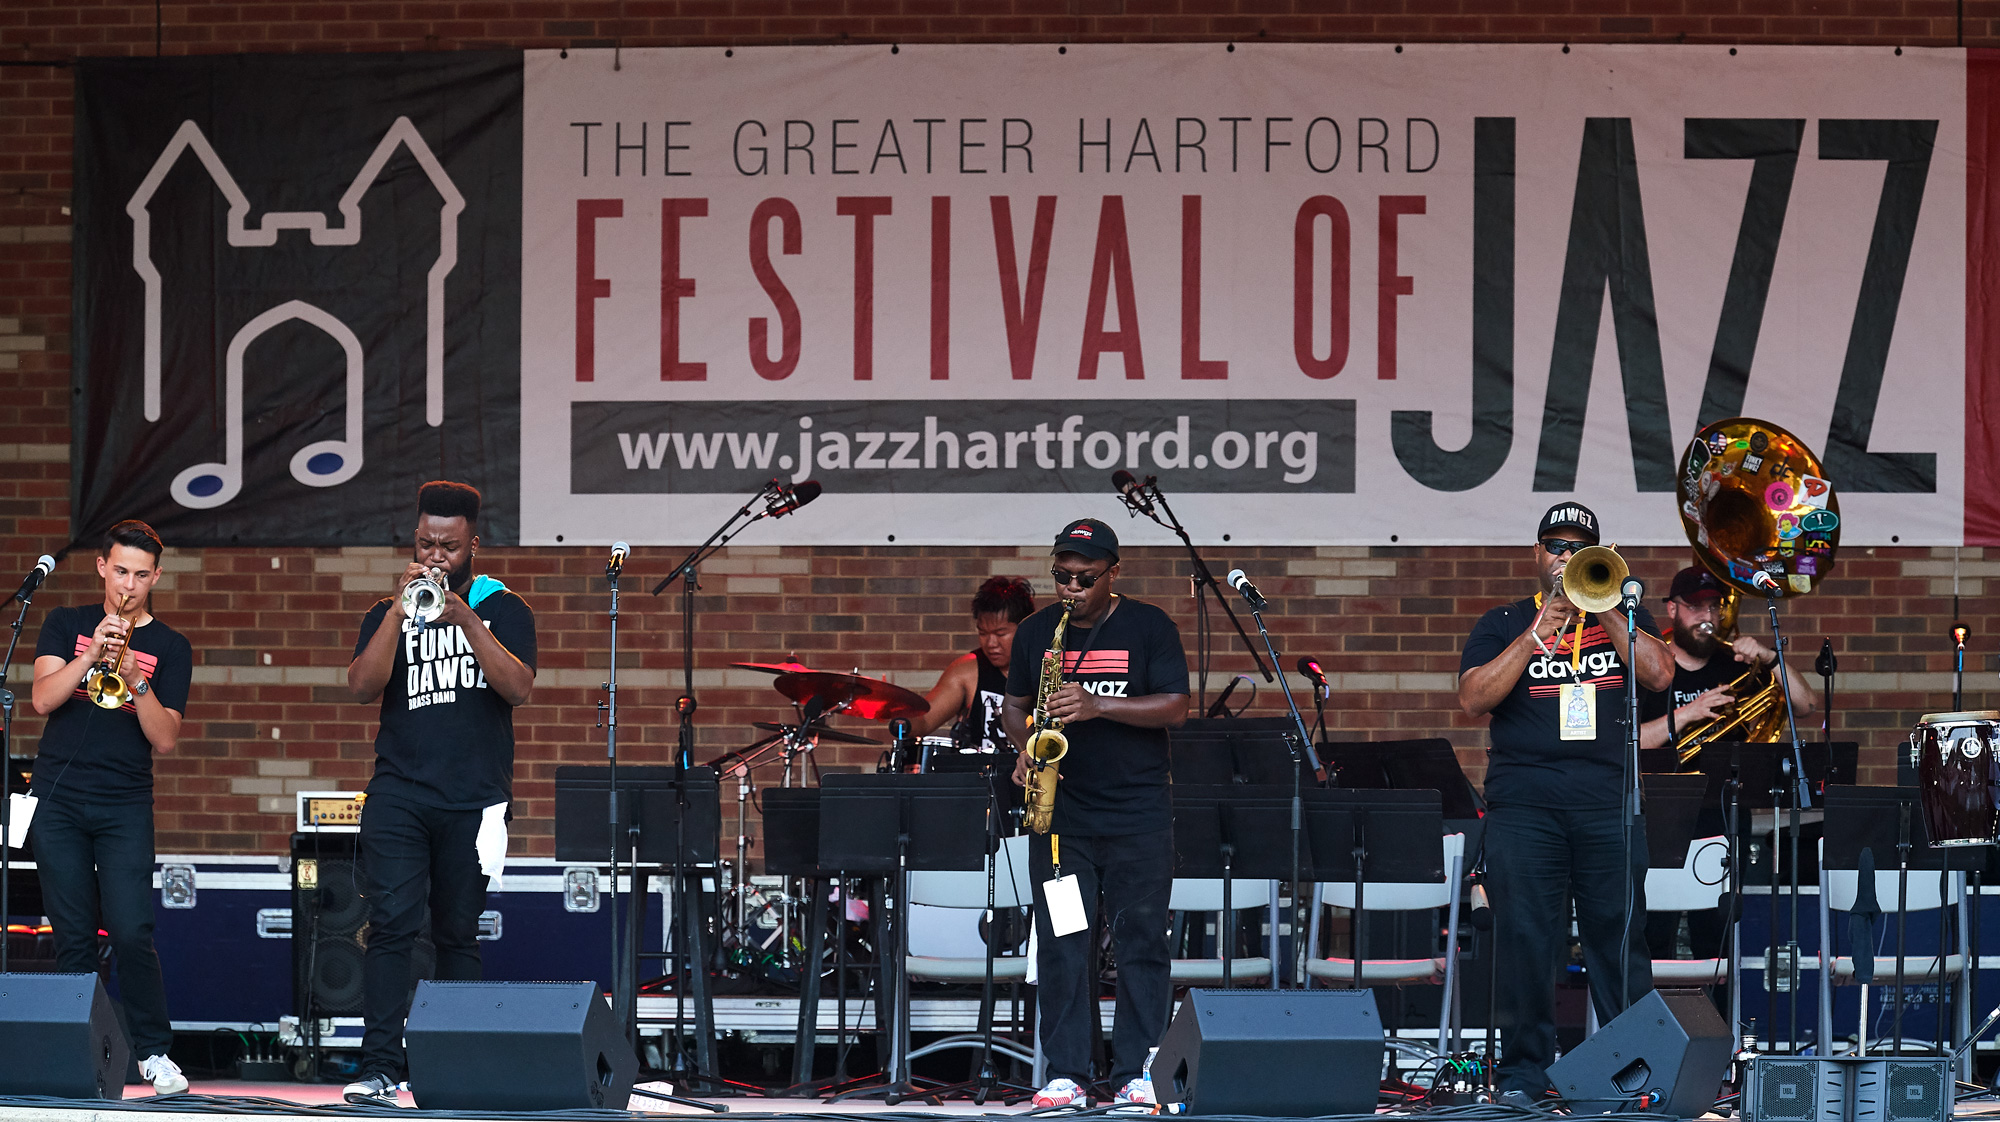 At Hartford Jazzfest this summer left to right: Jeremy Baouche ’19 (ENG), Aaron Eaddy ’14 (ENG), Singngam, Walters, Marsters, and McNeill.